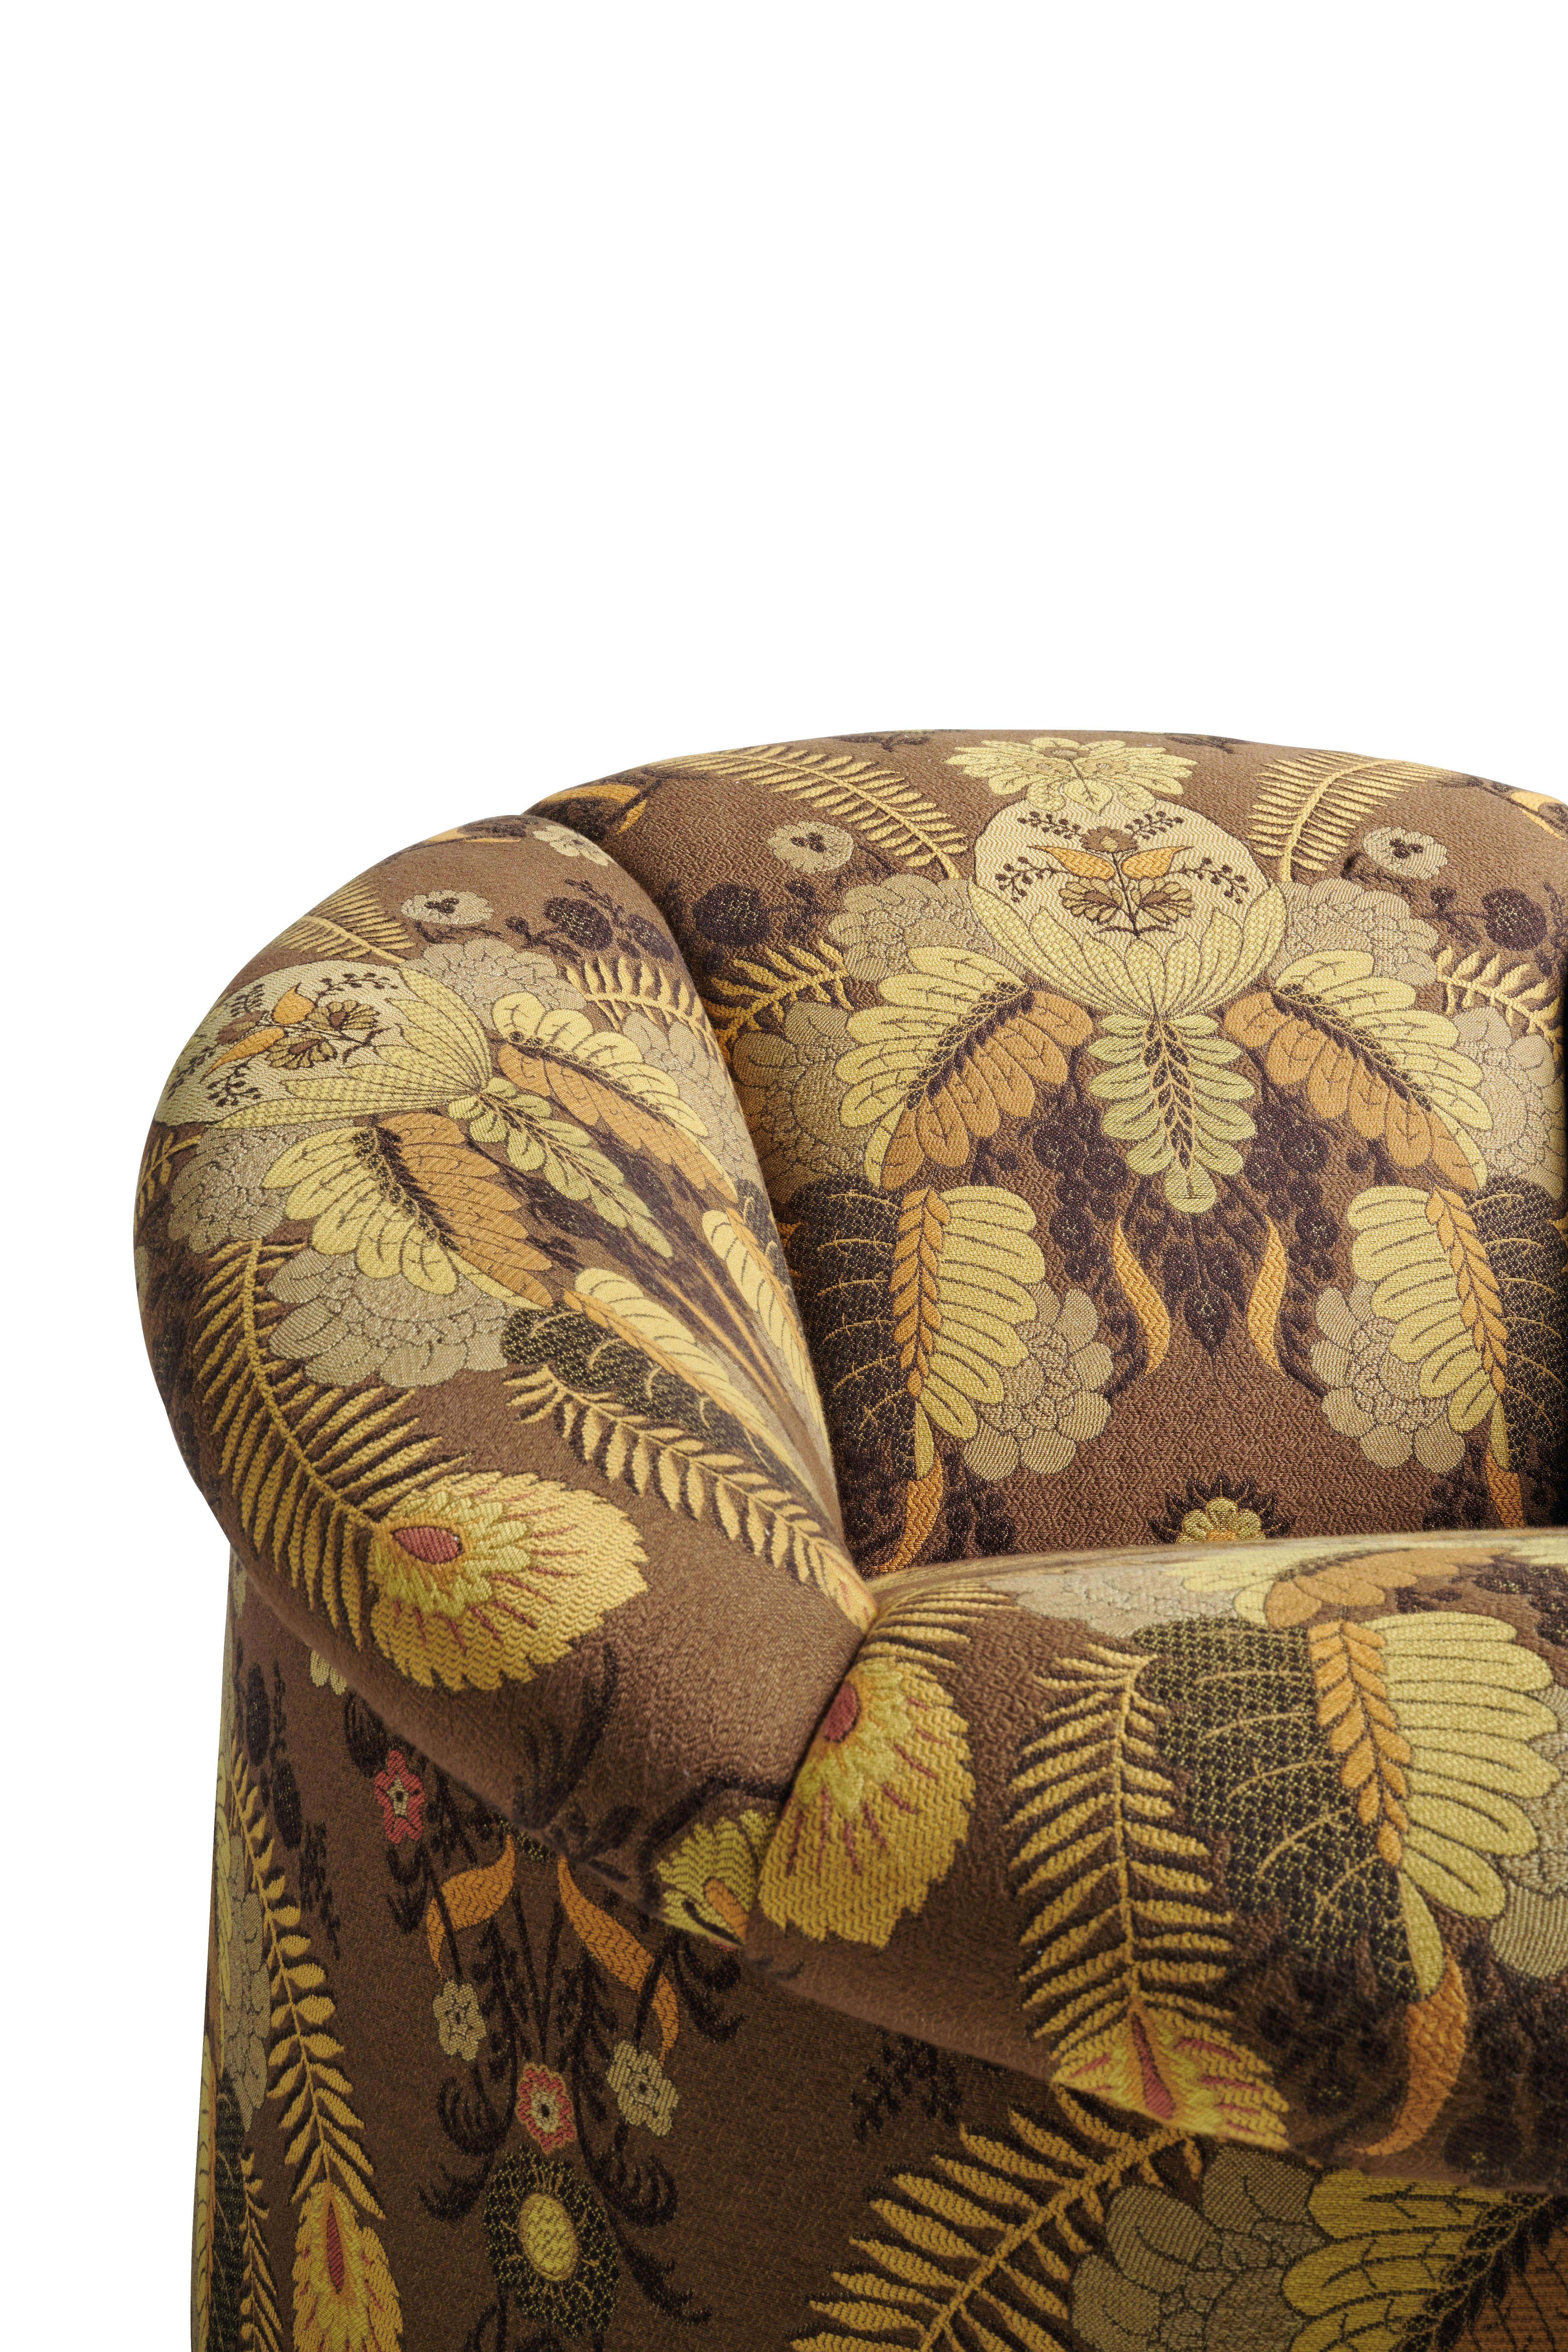 Italian 21st Century Dahlia Armchair in Brown Jacquard Fabric by Etro Home Interiors For Sale